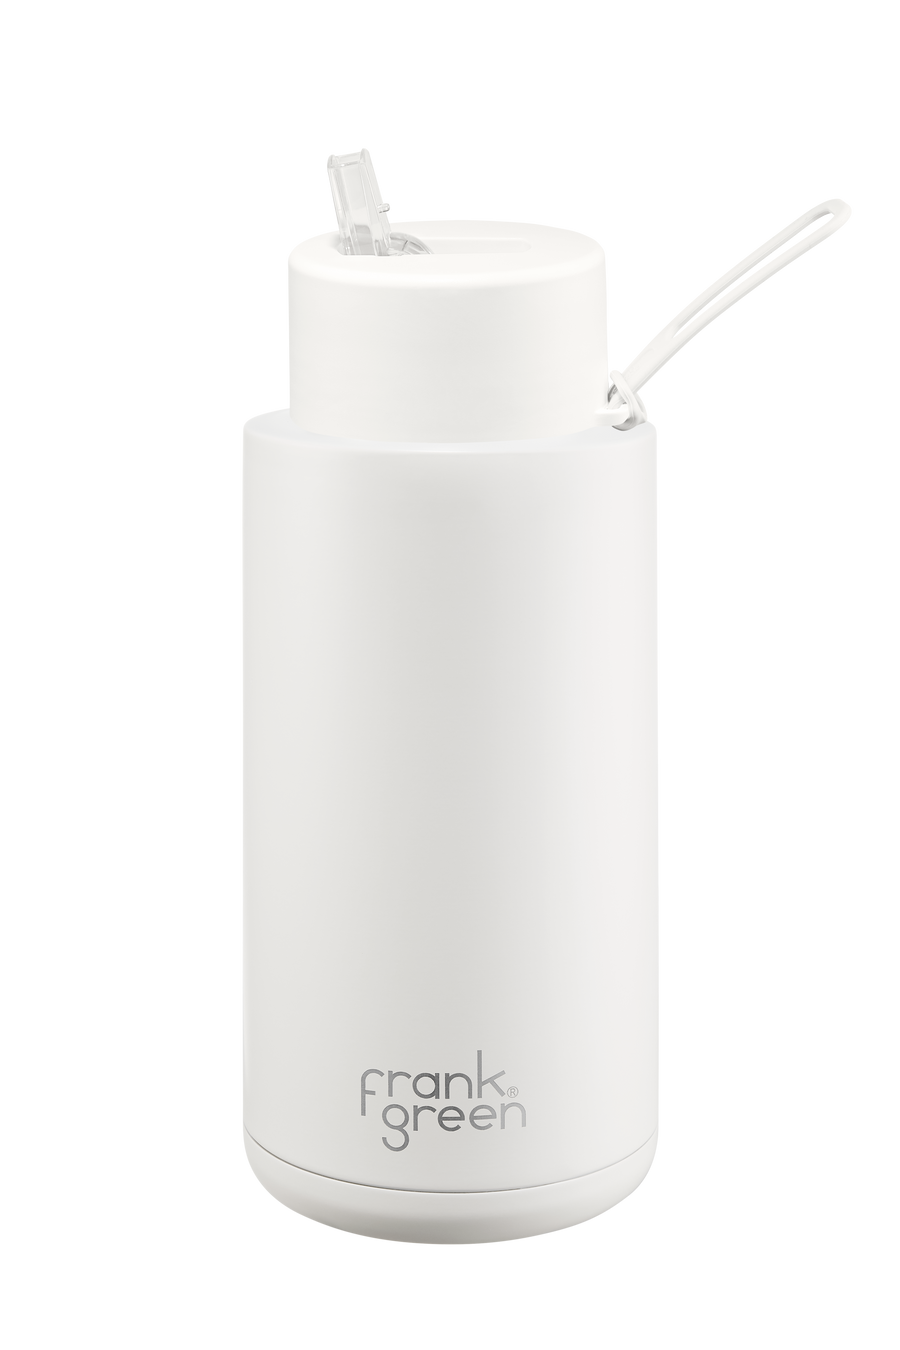 Frank Green Ceramic Reusable Insulated Drink Bottle. 34oz/1L, Straw Lid, Cloud white